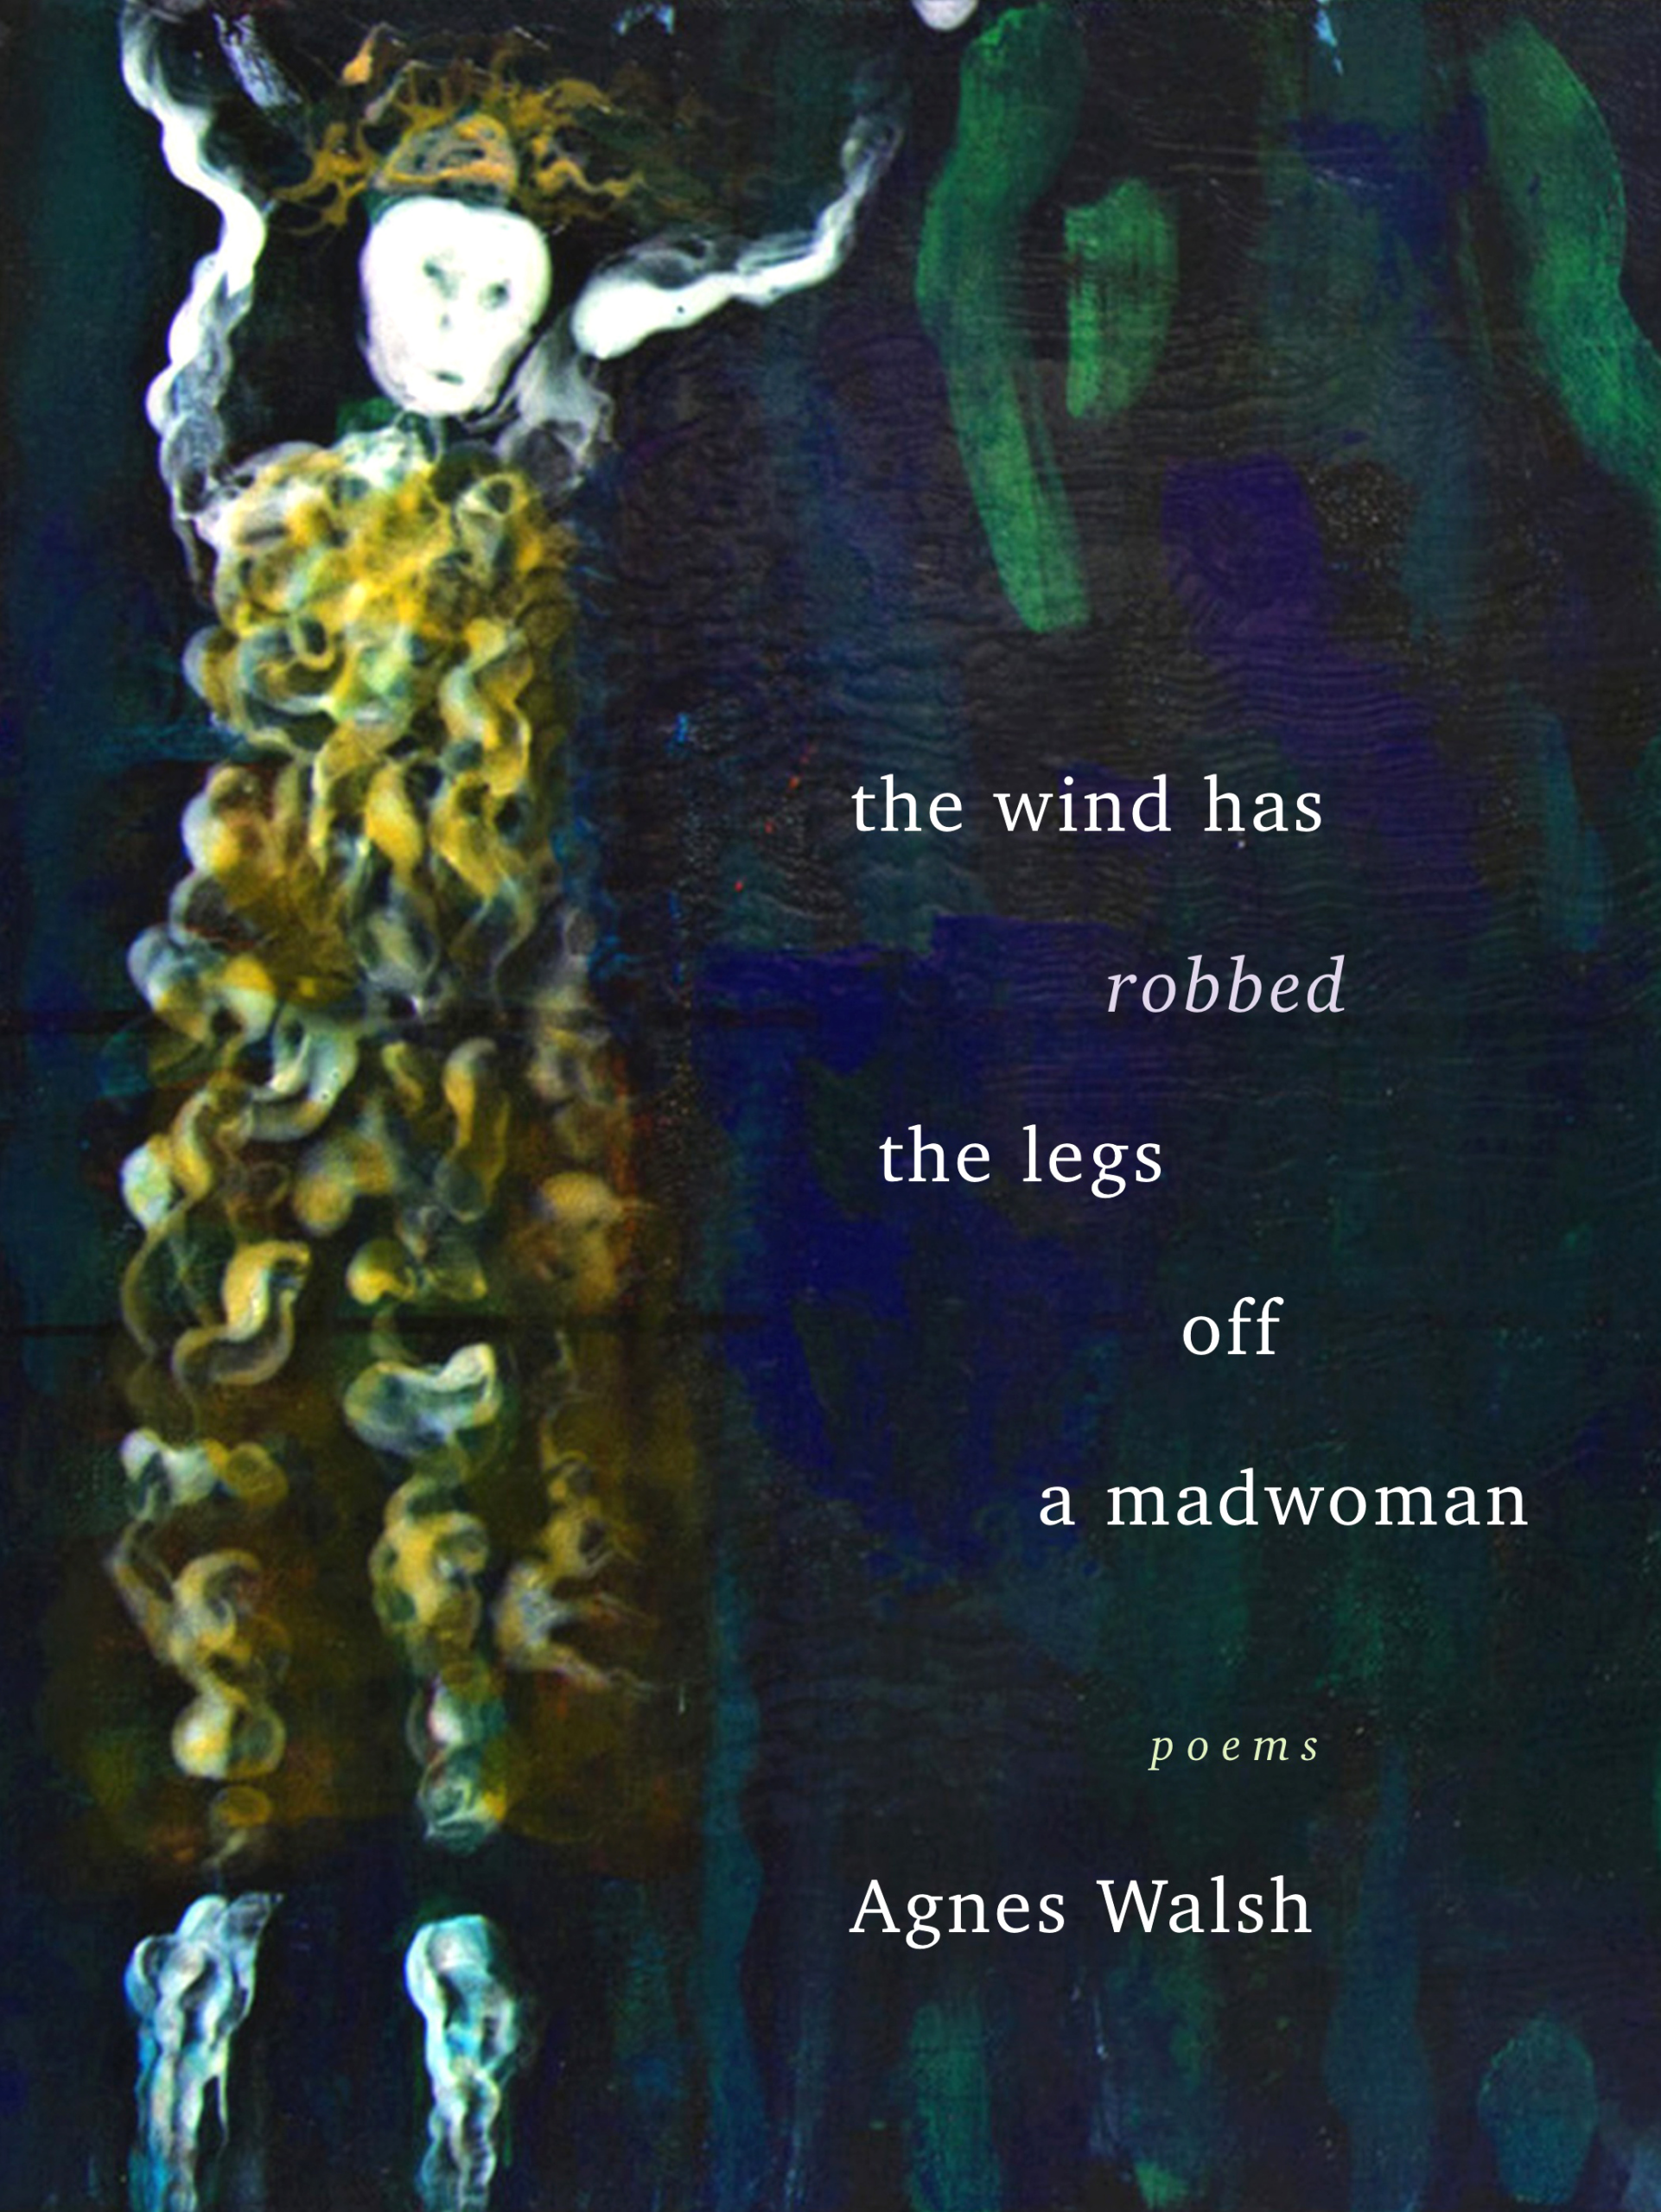 The cover of The Wind Has Robbed the Legs Off a Madwoman